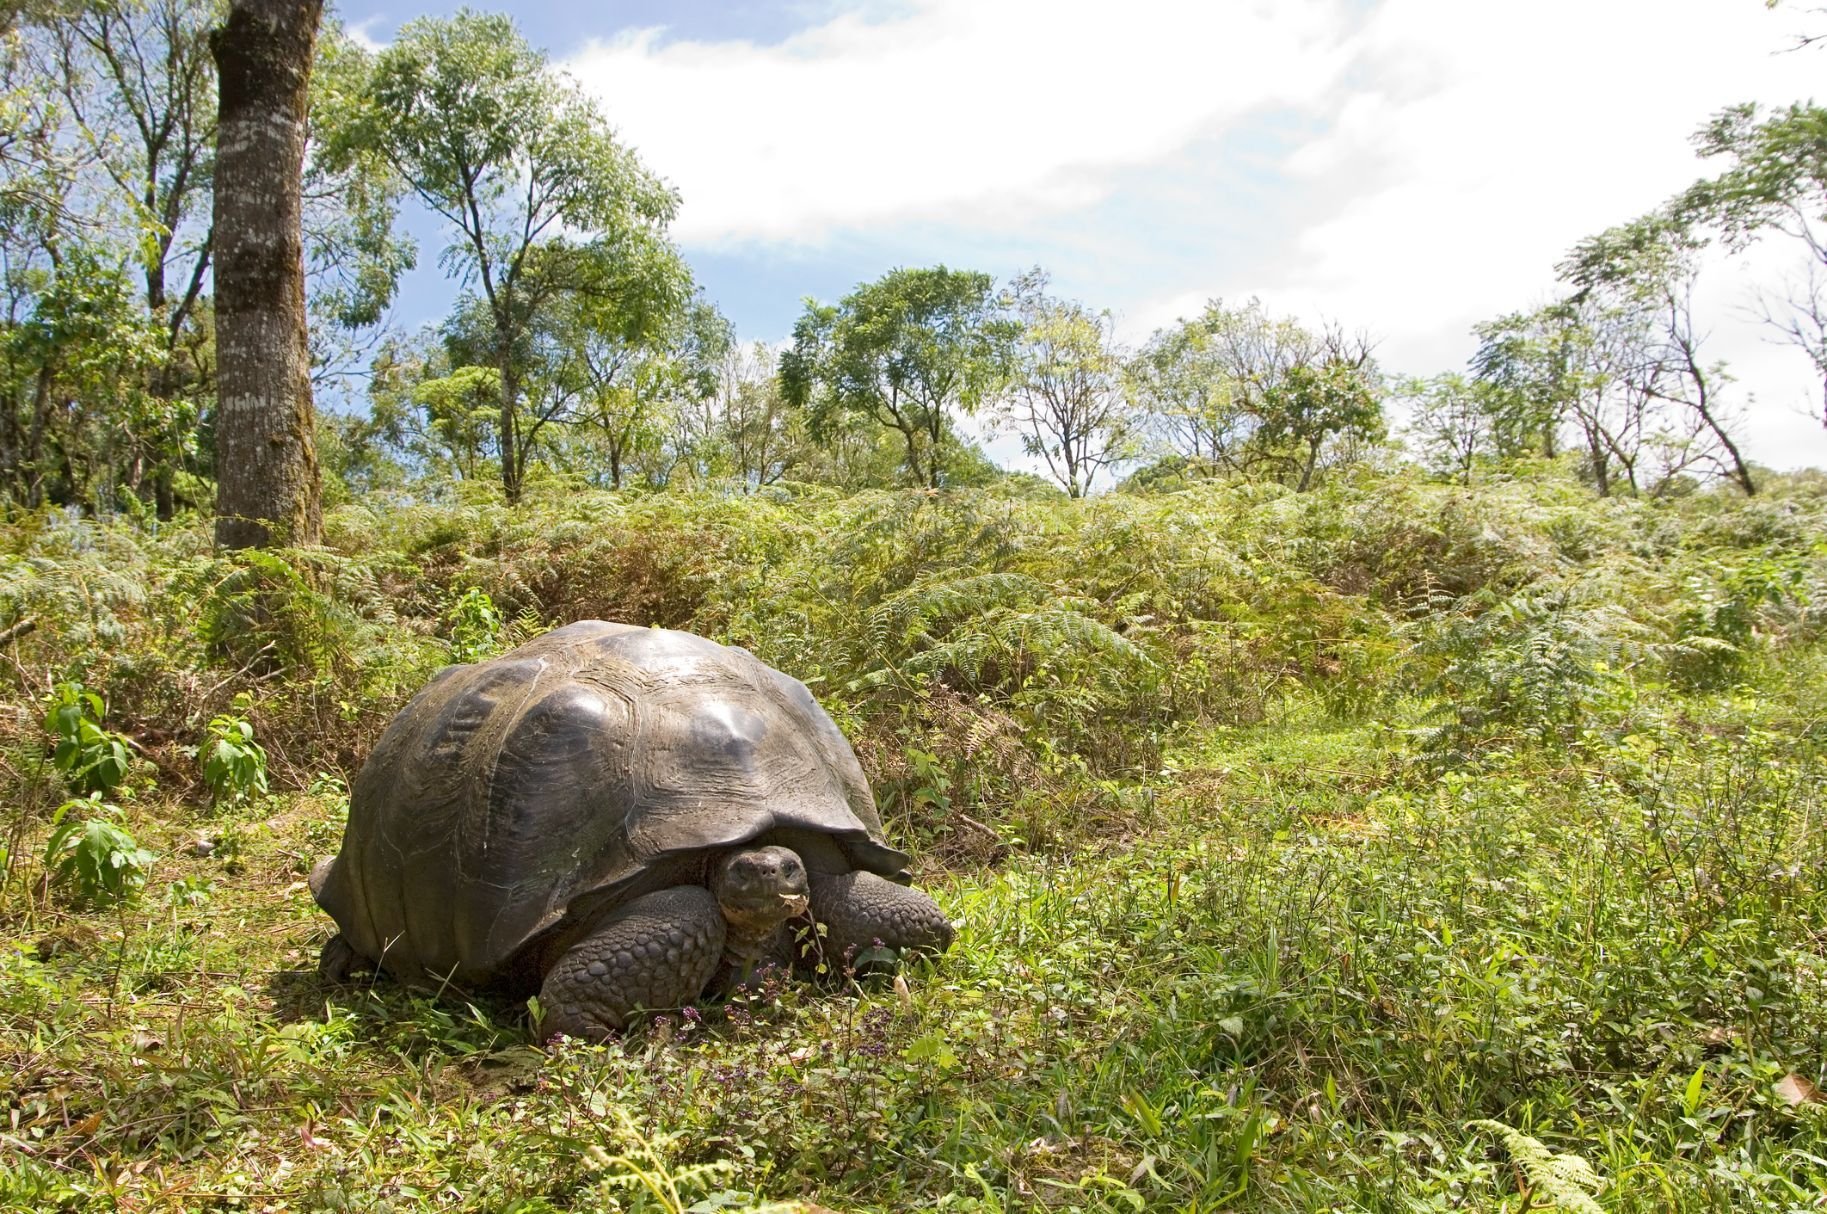 A Galapagos giant tortoise enjoying the sunshine at El Chato Reserve, Galapagos. Photo: Getty.